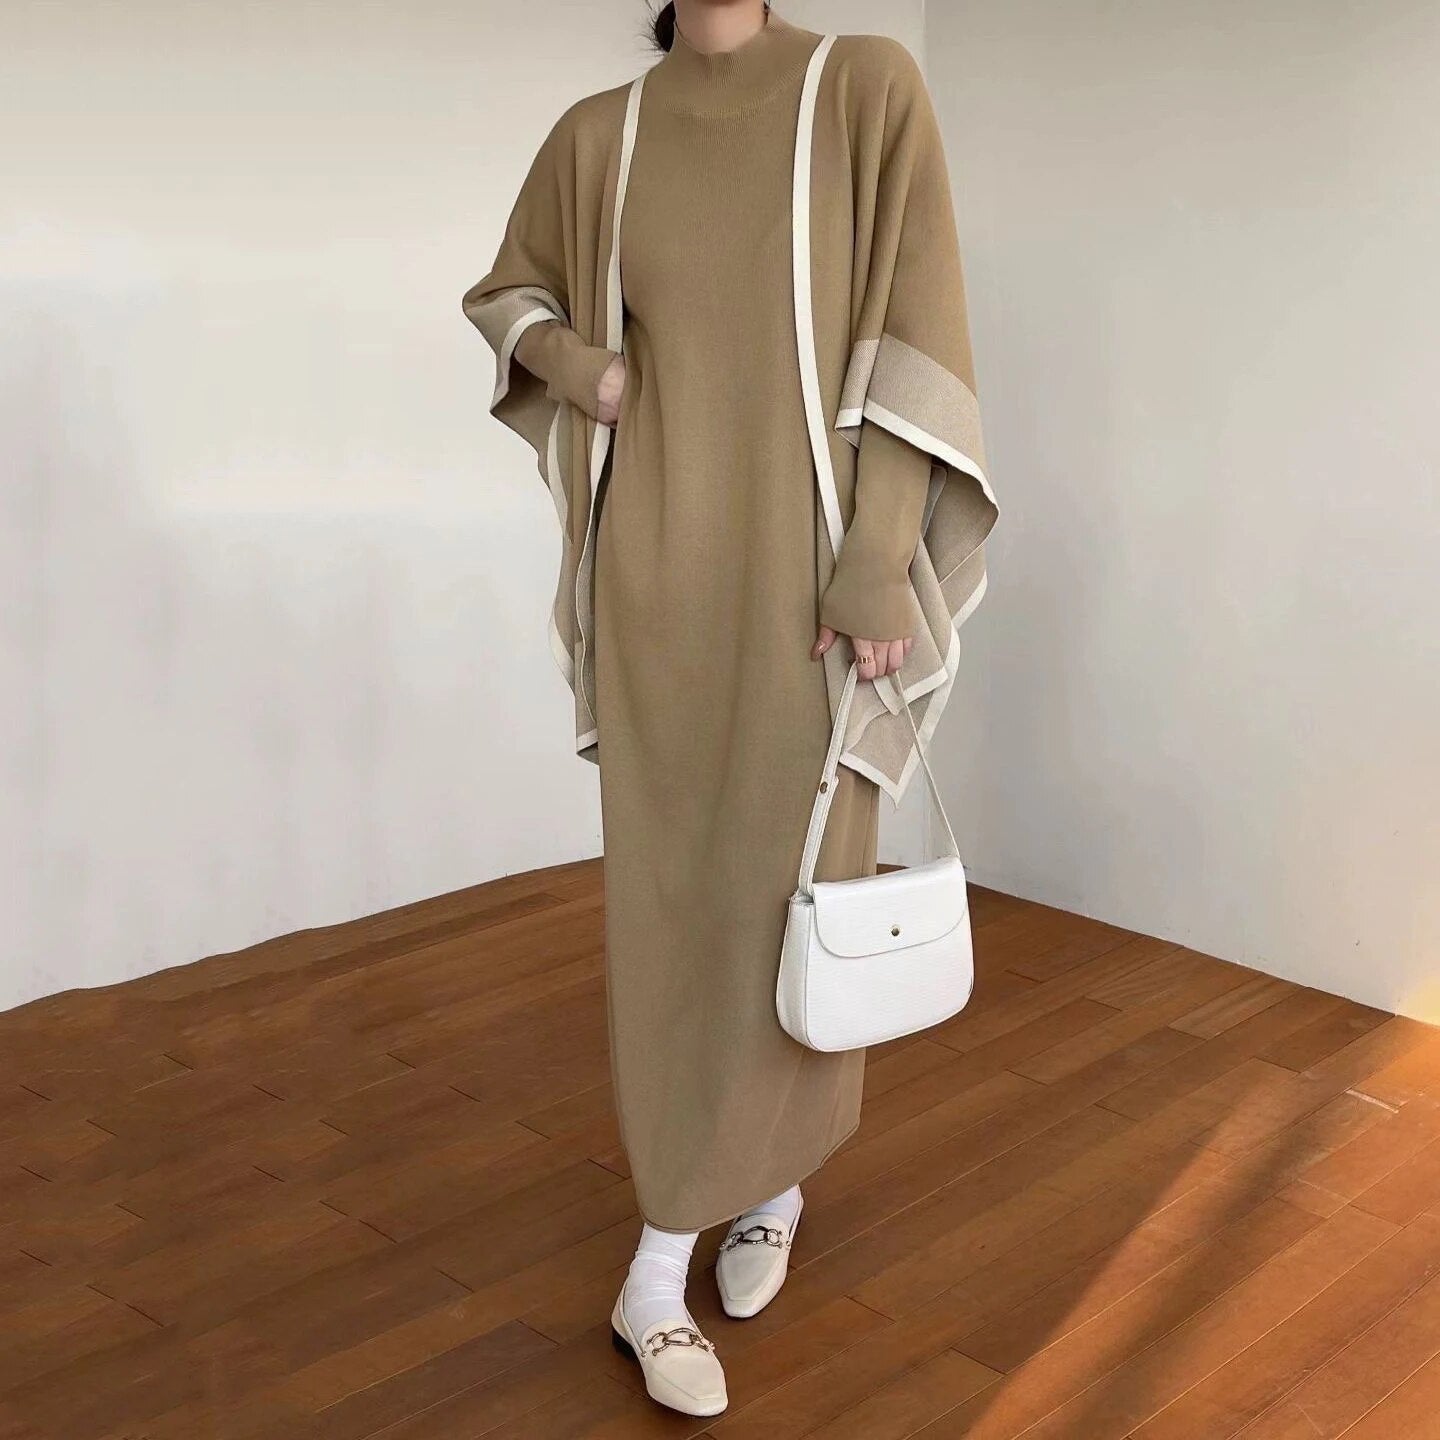 Bianca luxury Woolen Dress with Cover Up